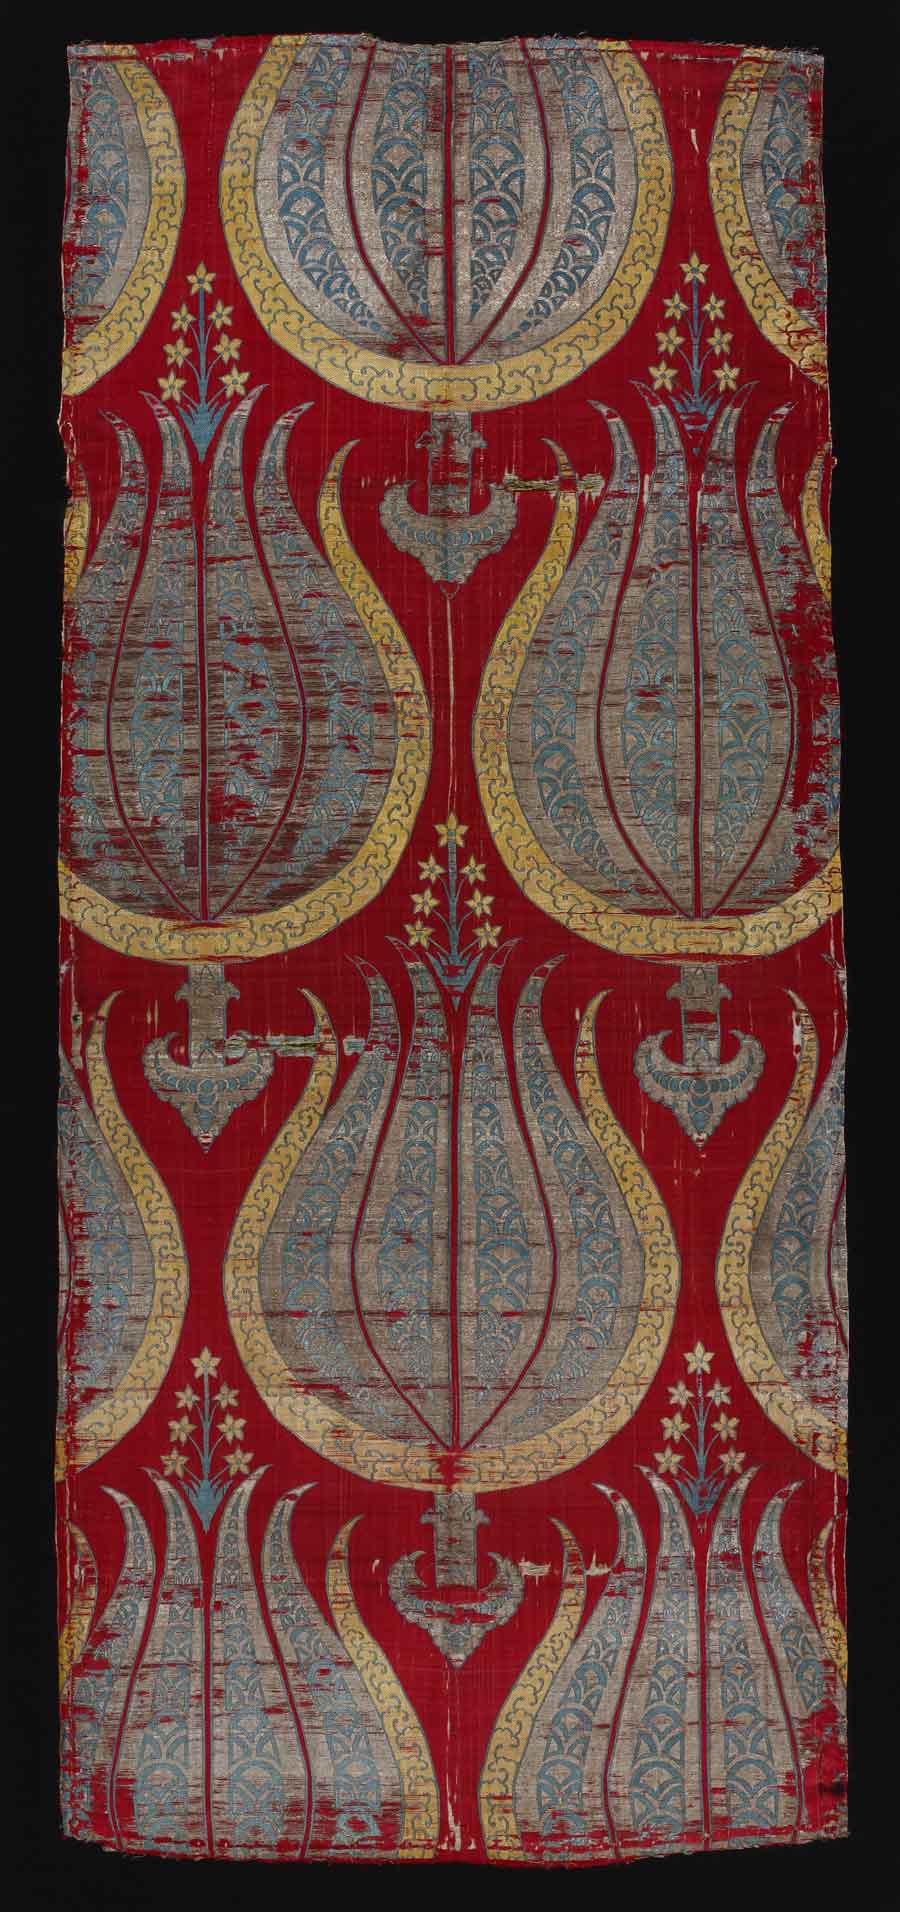 Silk with stylized tulips, Turkey; 2nd half of 16th century <br><br> The designs of large-patterned Ottoman silks from the 16th century are among the most sublime woven anywhere. They were made in Bursa and Istanbul, and their patterns were often designed by the artists in the court studio (nakkaşhane). The most impressive group of these fabrics can in fact be found in the Topkapi Palace’s collection of the Ottoman sultans’ caftans. <br> Rows of stylized tulips form the pattern. The tulips have six petals: the outermost two are golden and blue with Chinese cloud ornaments, and the four innermost are silver and blue with a scale pattern. A seven-headed stamen and an odd stalk further denaturalize the motif. The use of precious metals for these textiles resulted in several bans on weaving them.